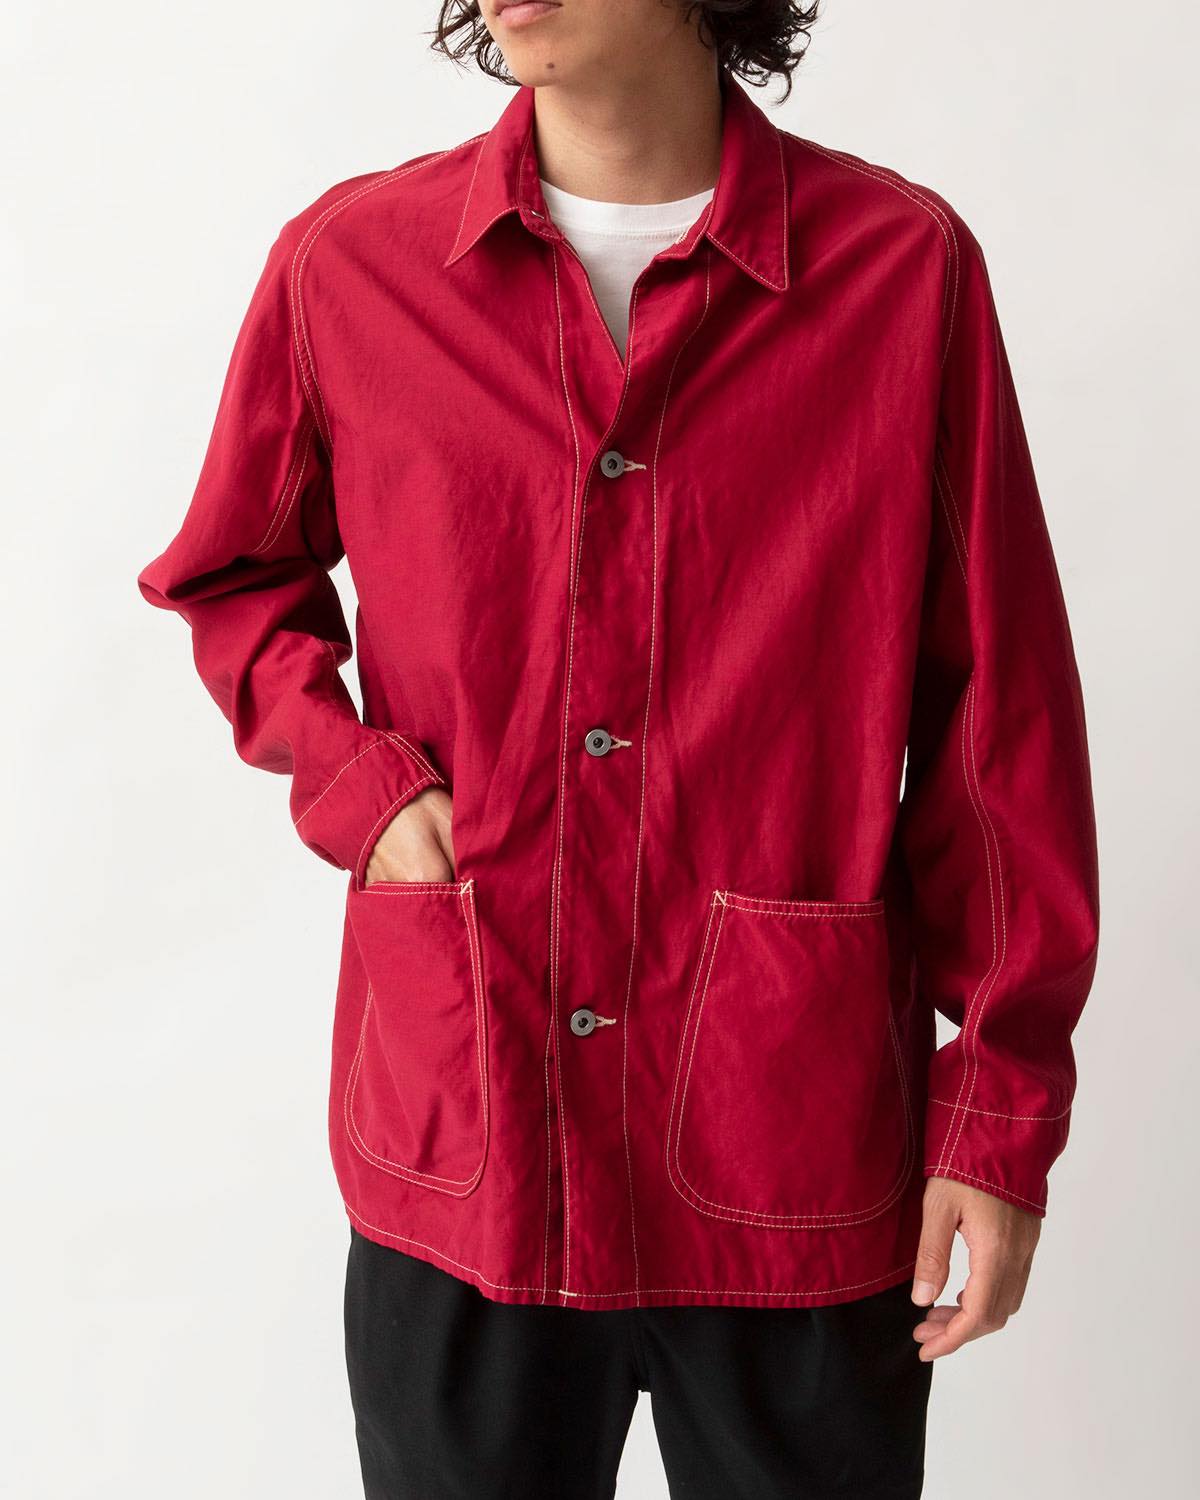 A.PRESSE アプレッセ Coverall Jacket 22ss 1サカイ